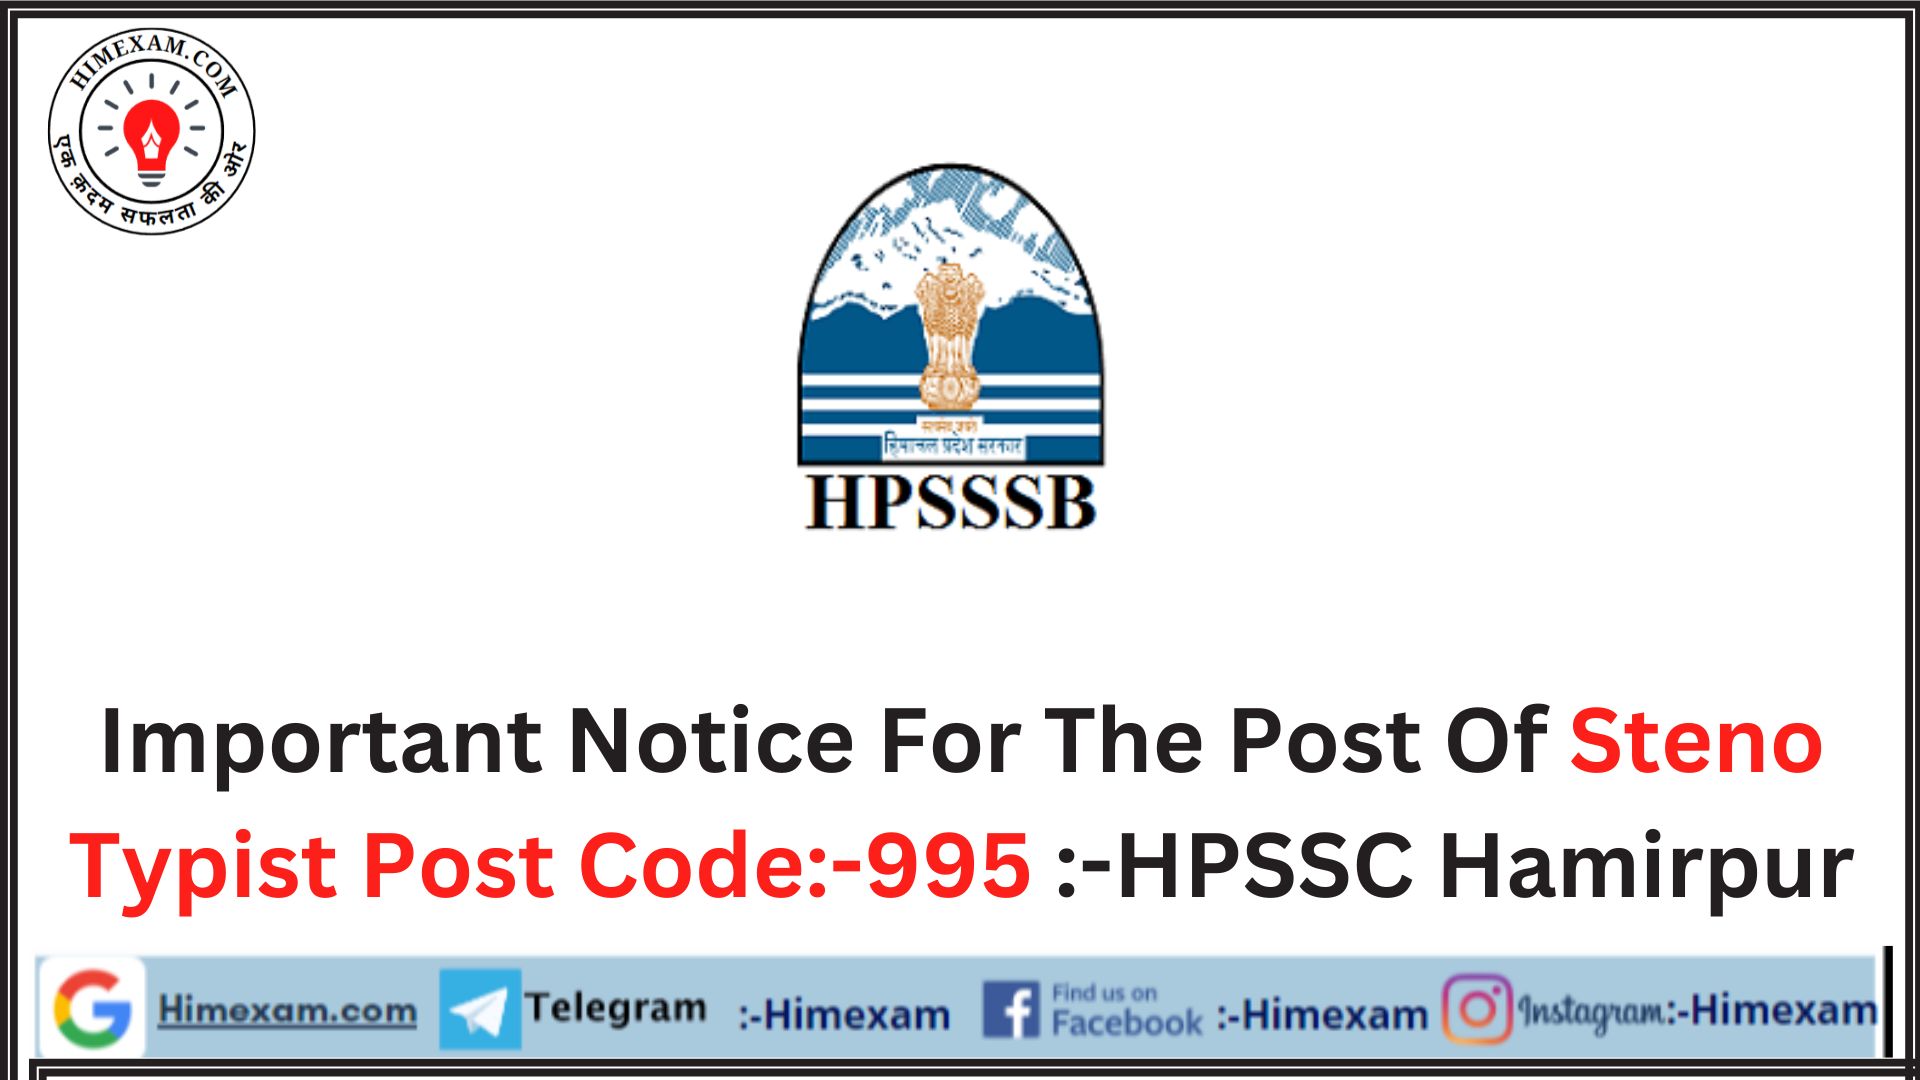 Important Notice For The Post Of Steno Typist Post Code:-995 :-HPSSC Hamirpur